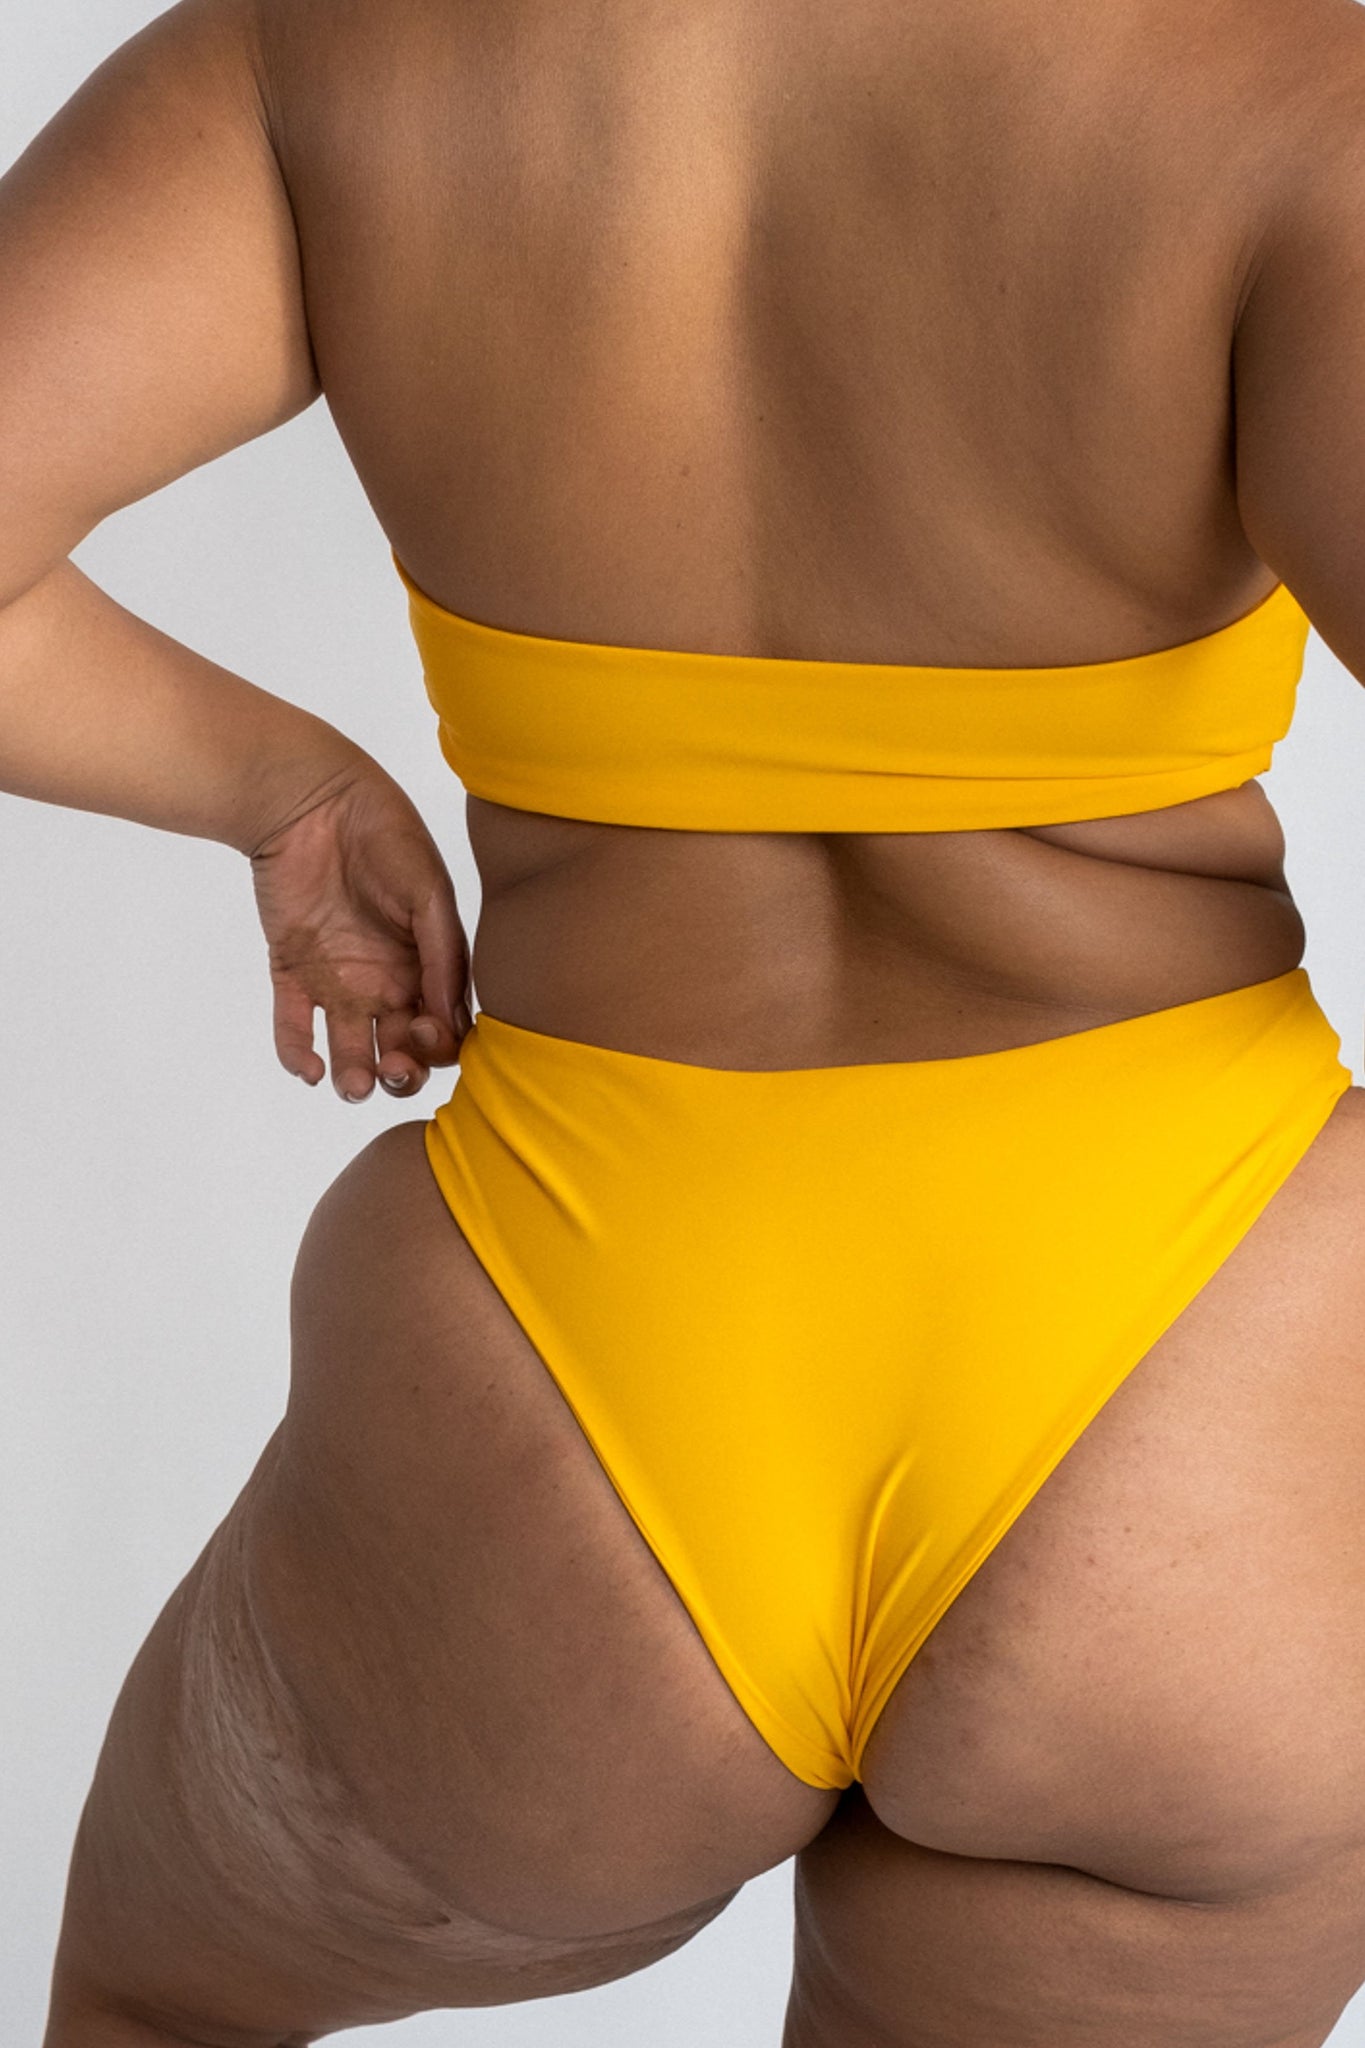 A close up of the back of a woman standing with her hands on her hips wearing yellow high cut bikini bottoms with a matching yellow strapless bandeau bikini top.